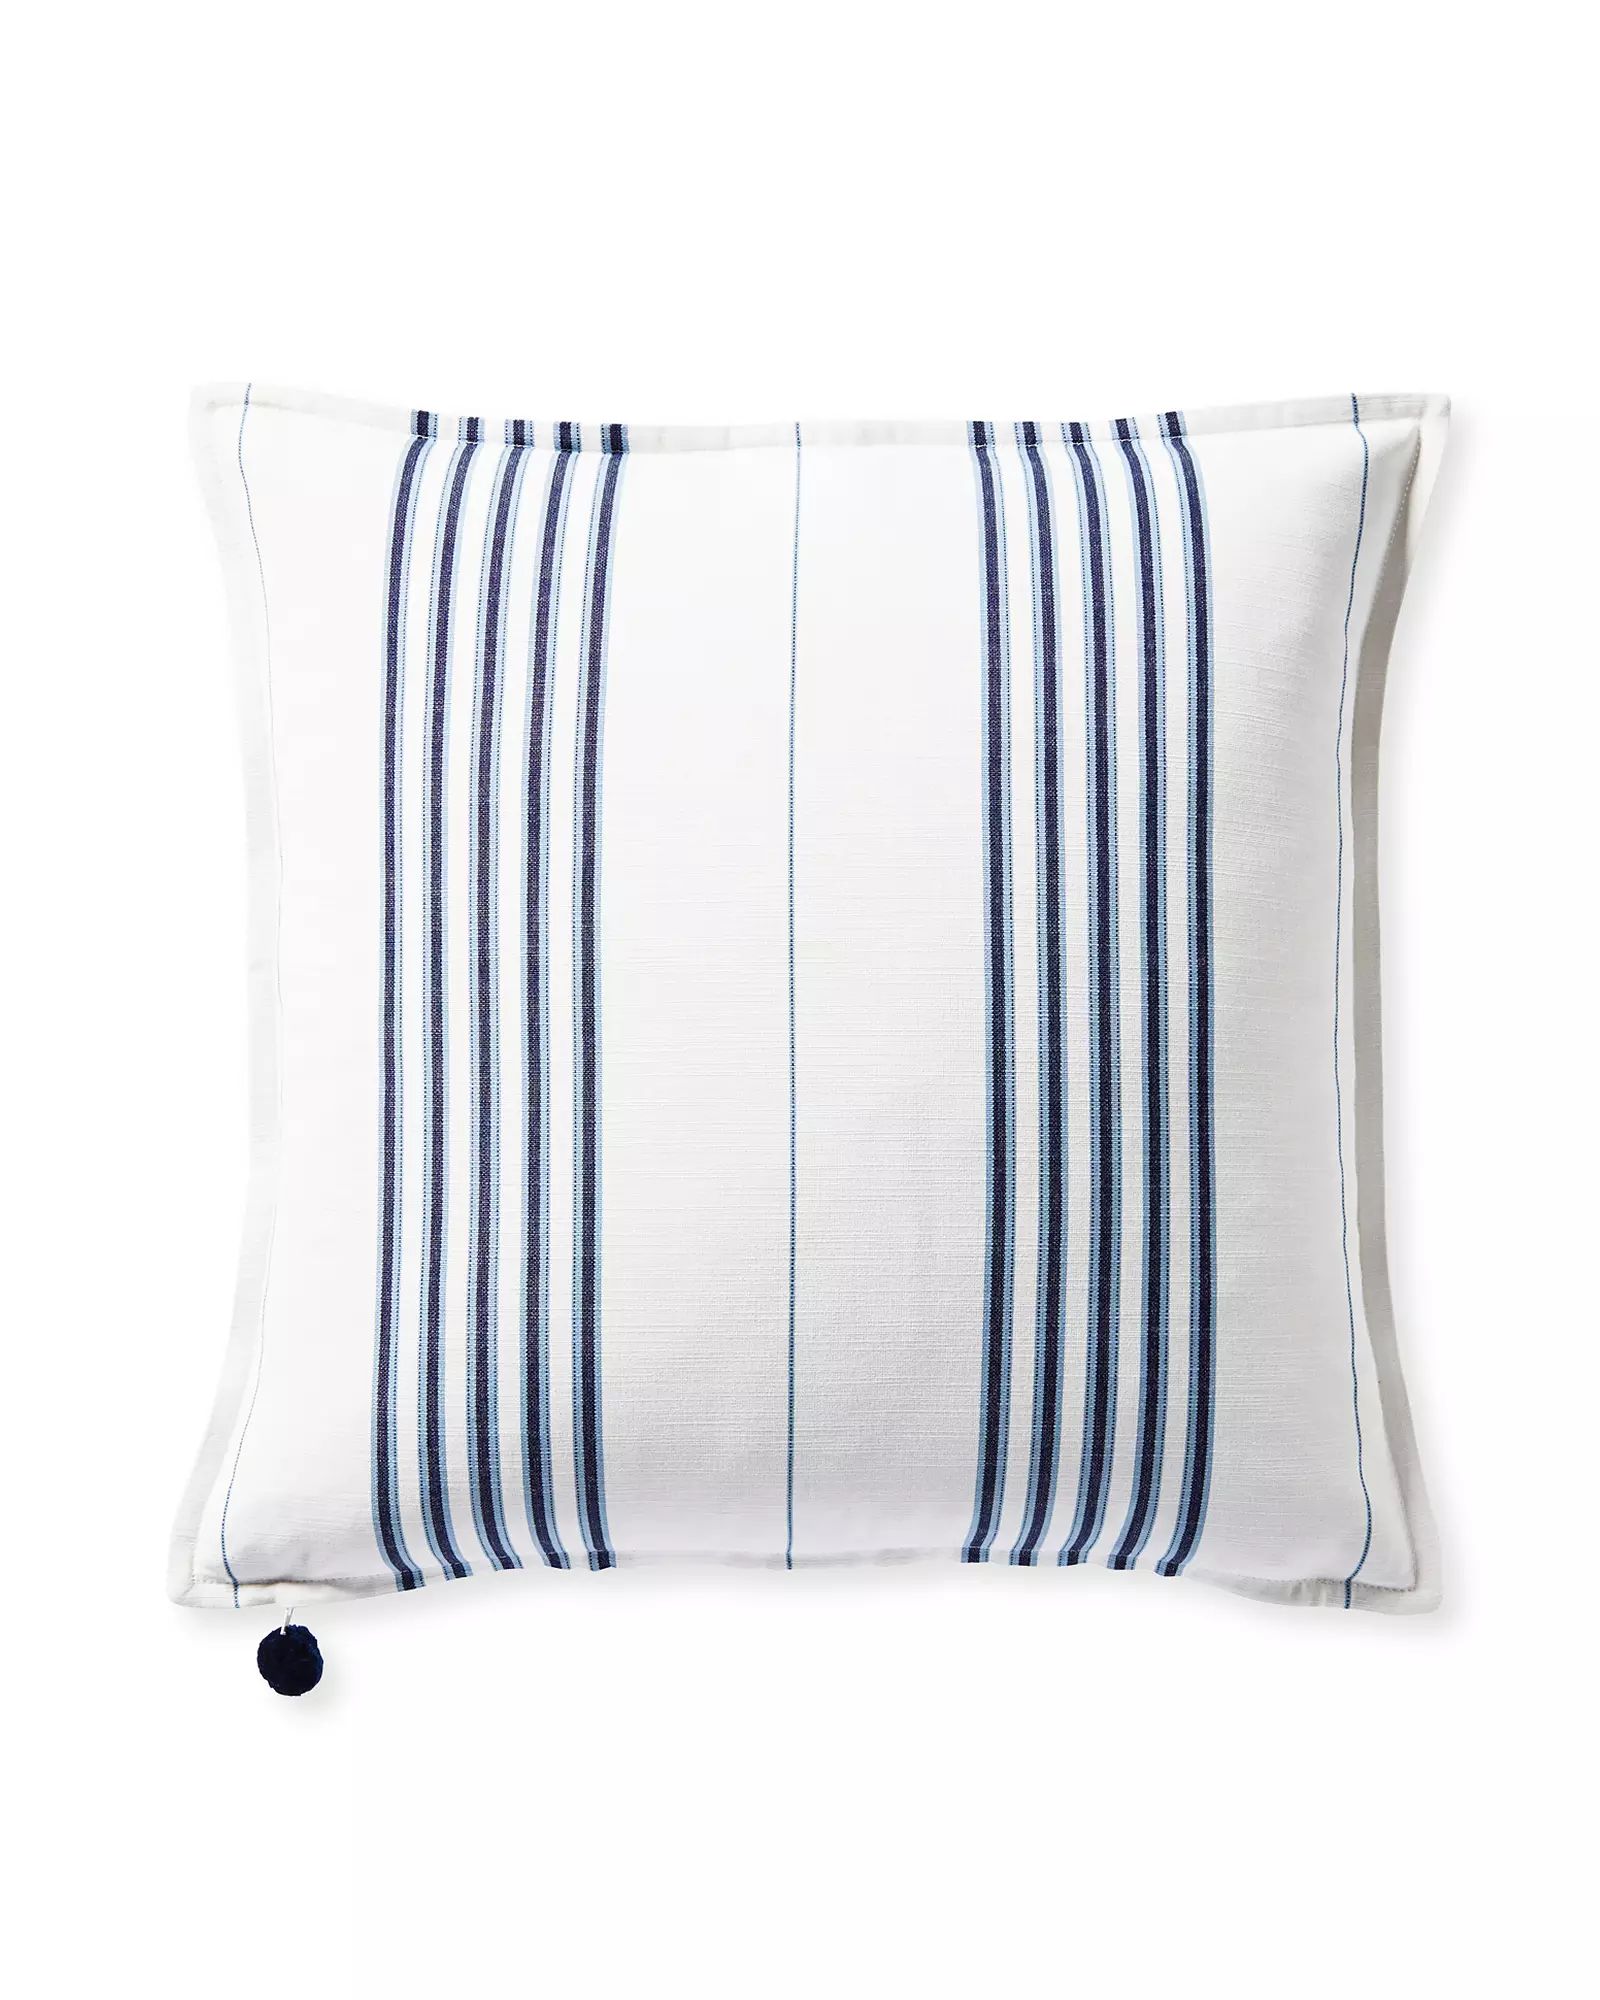 Perennials Lake Stripe Pillow Cover | Serena and Lily